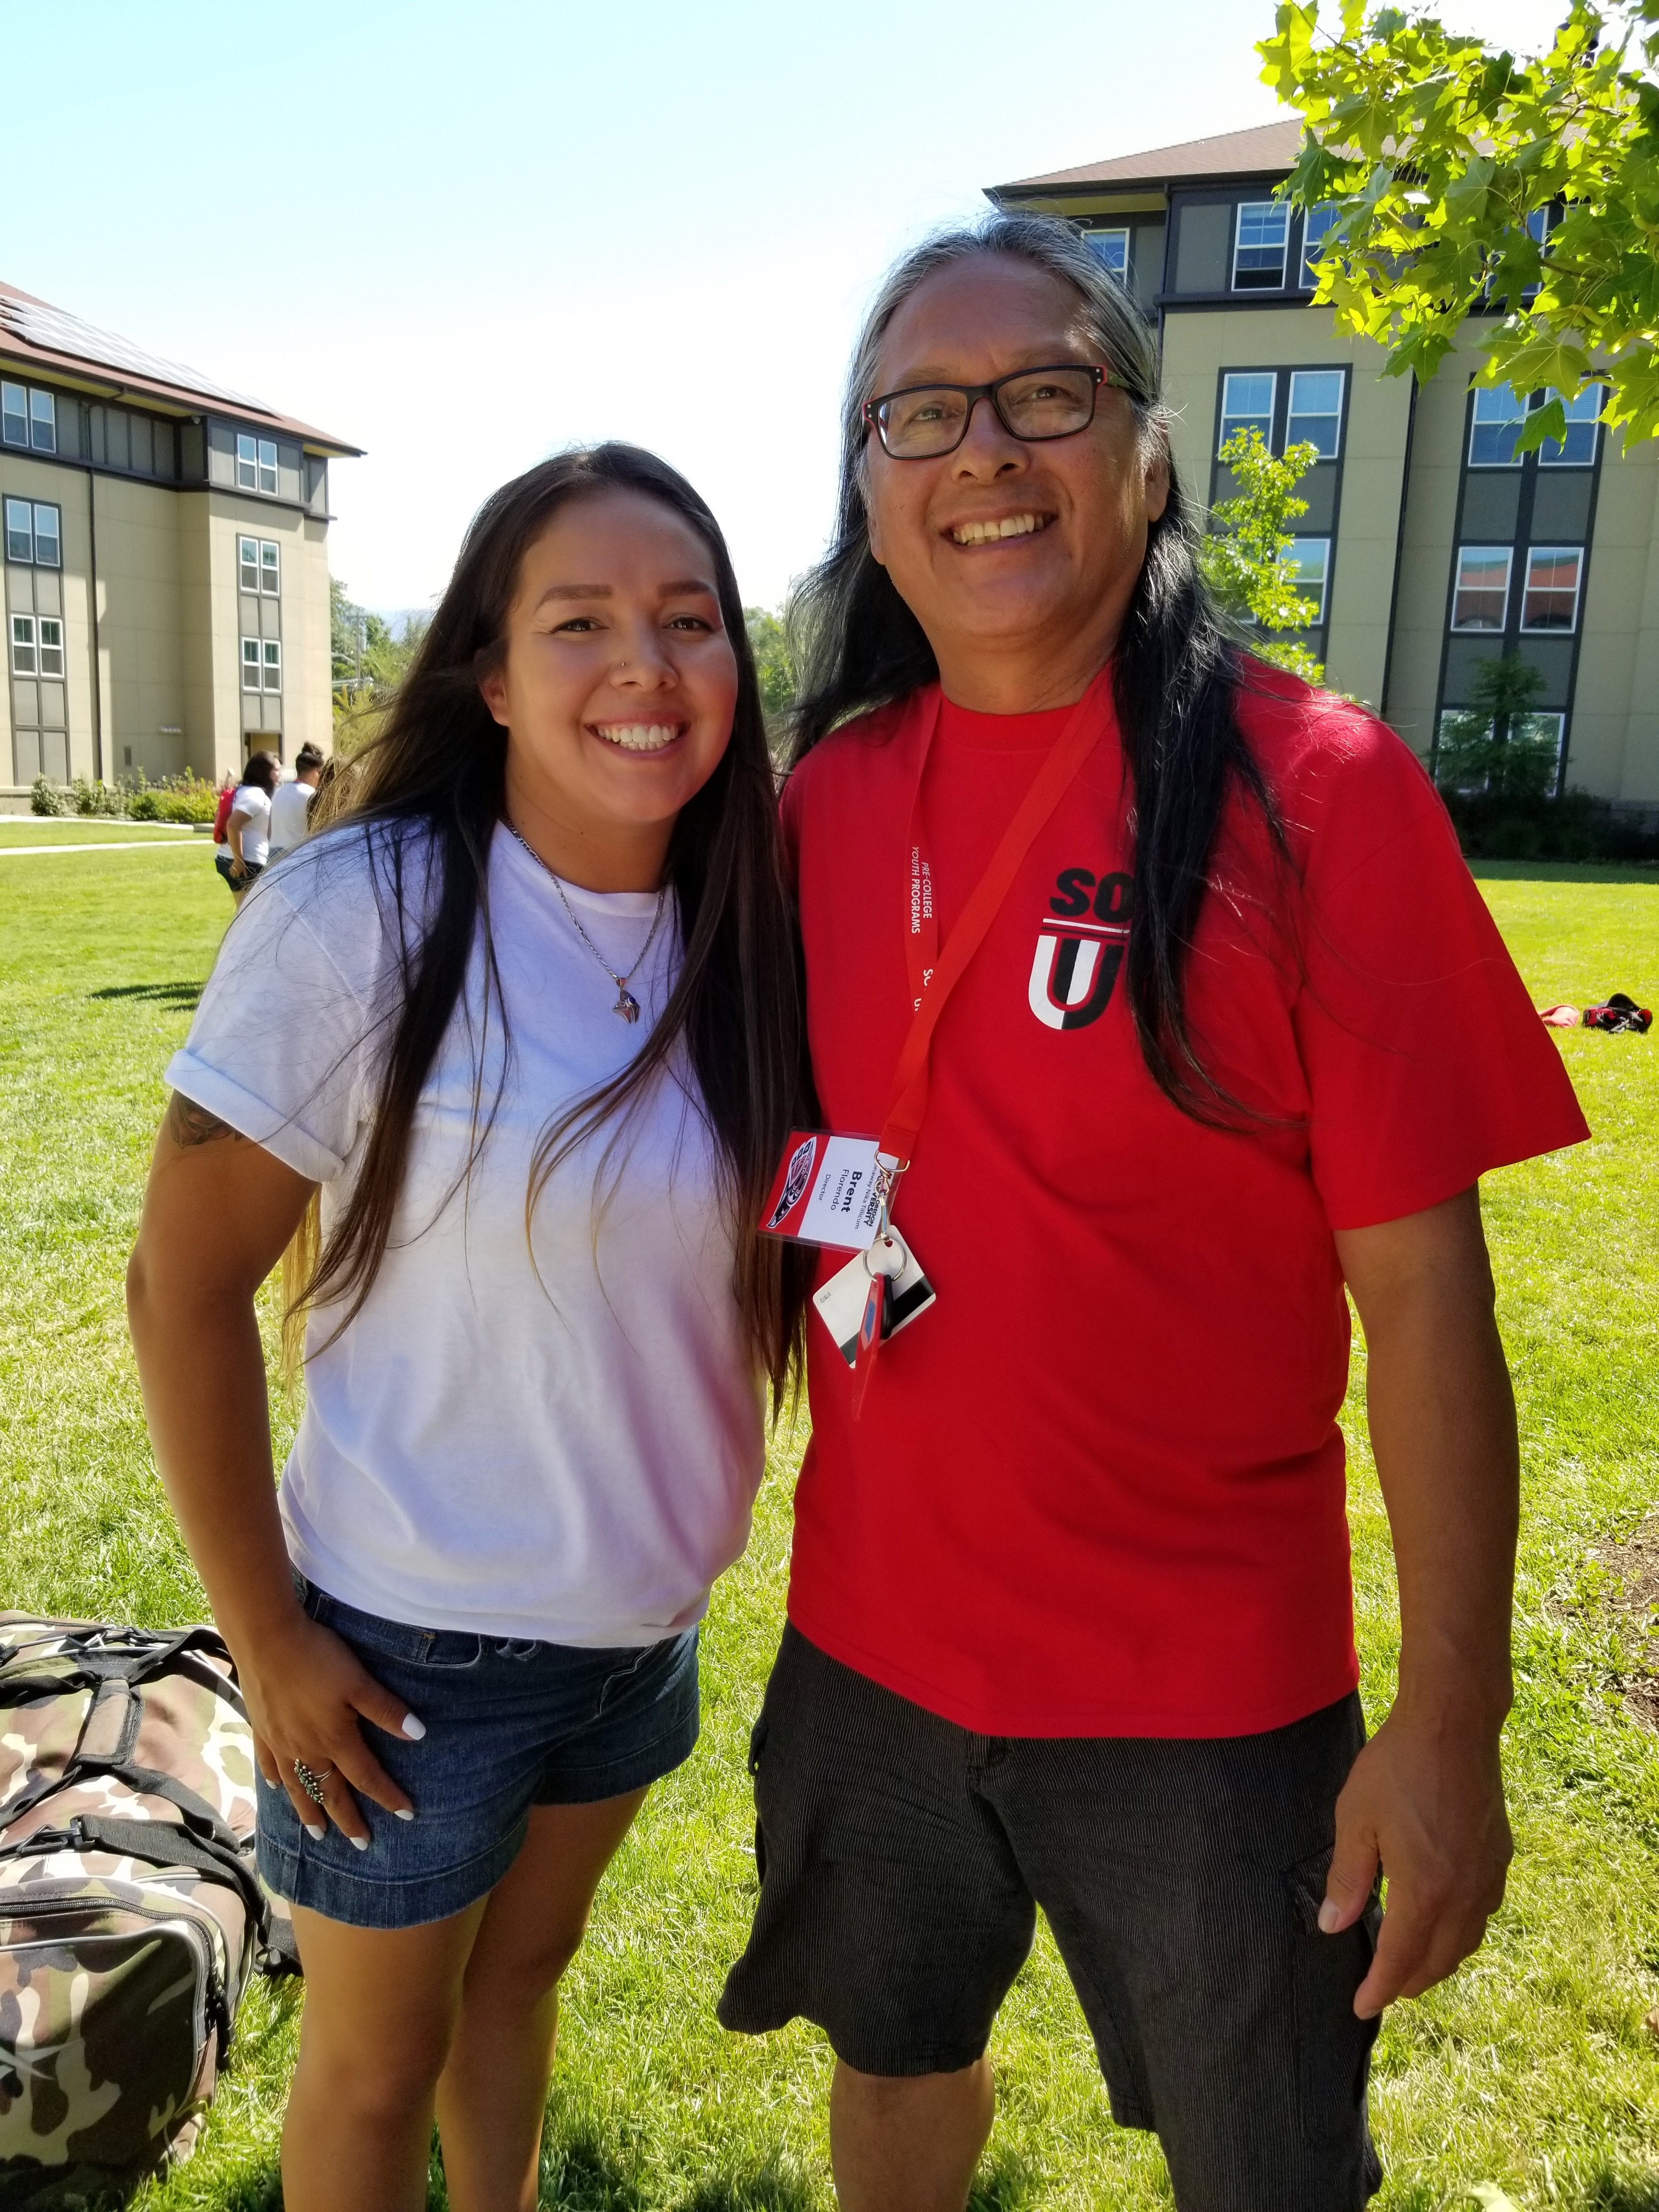 Brent Florendo and a student smiling in 2019